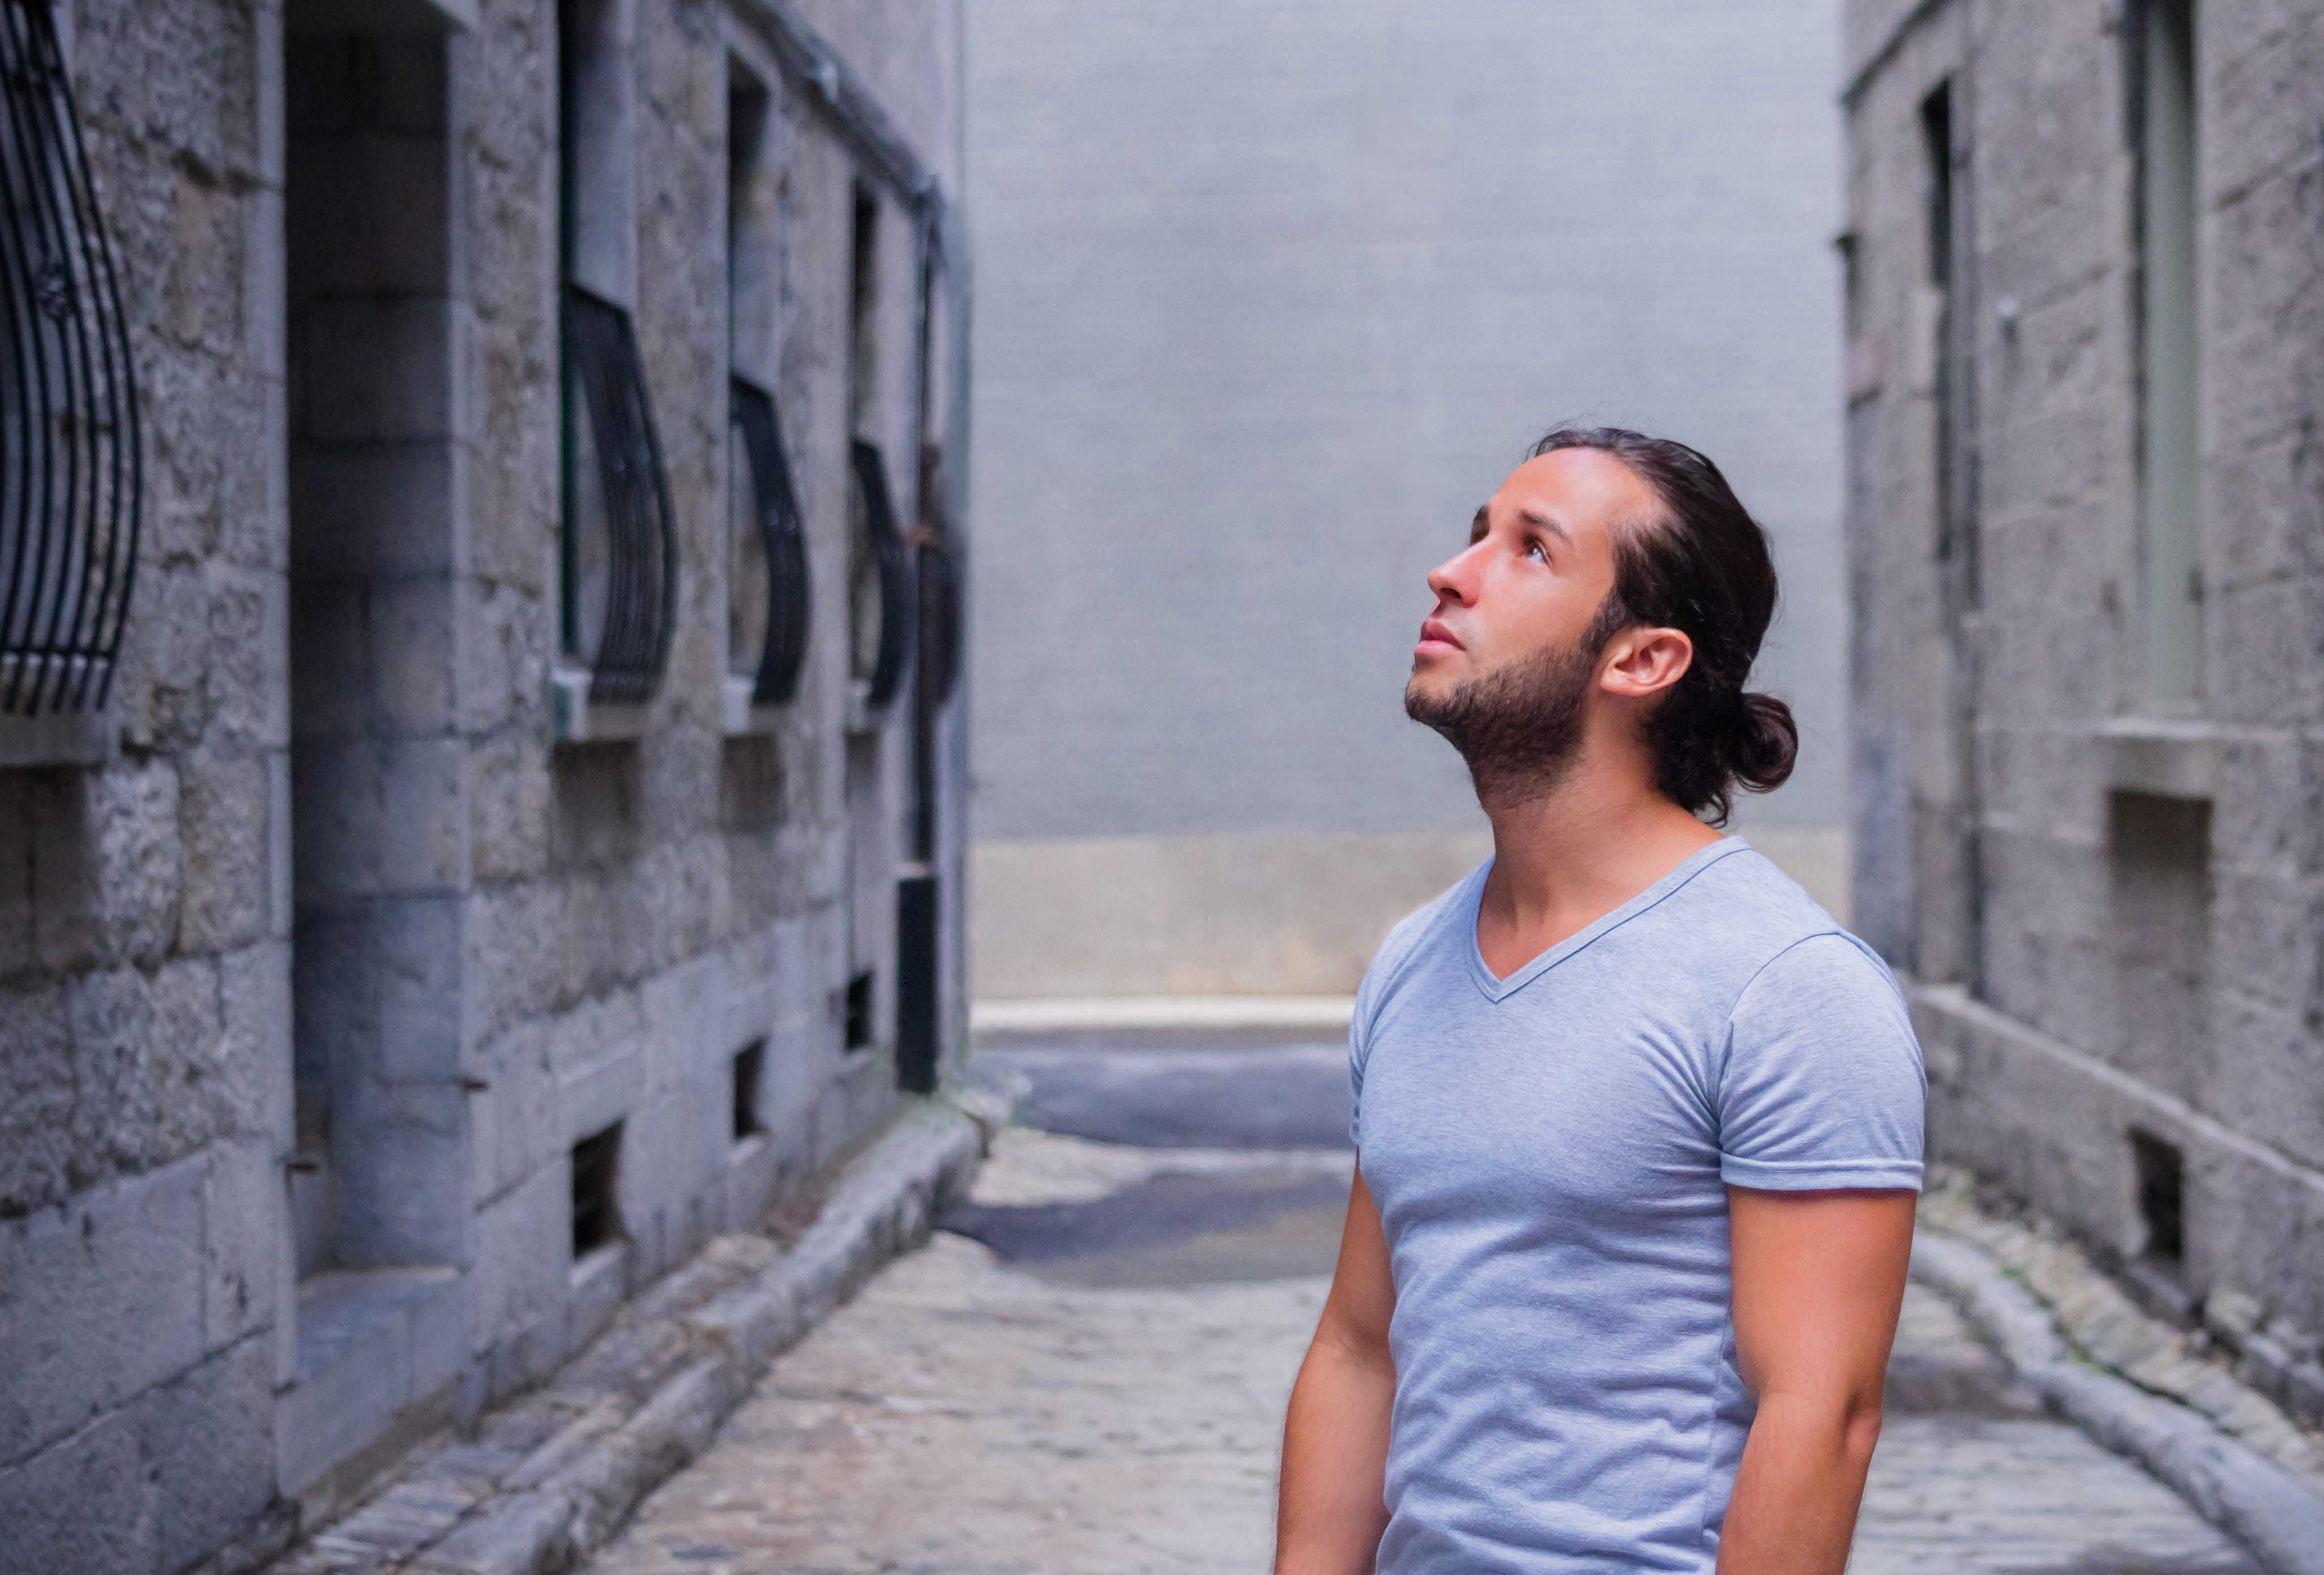 person in gray V-neck T-shirt standing near gray concrete buildings